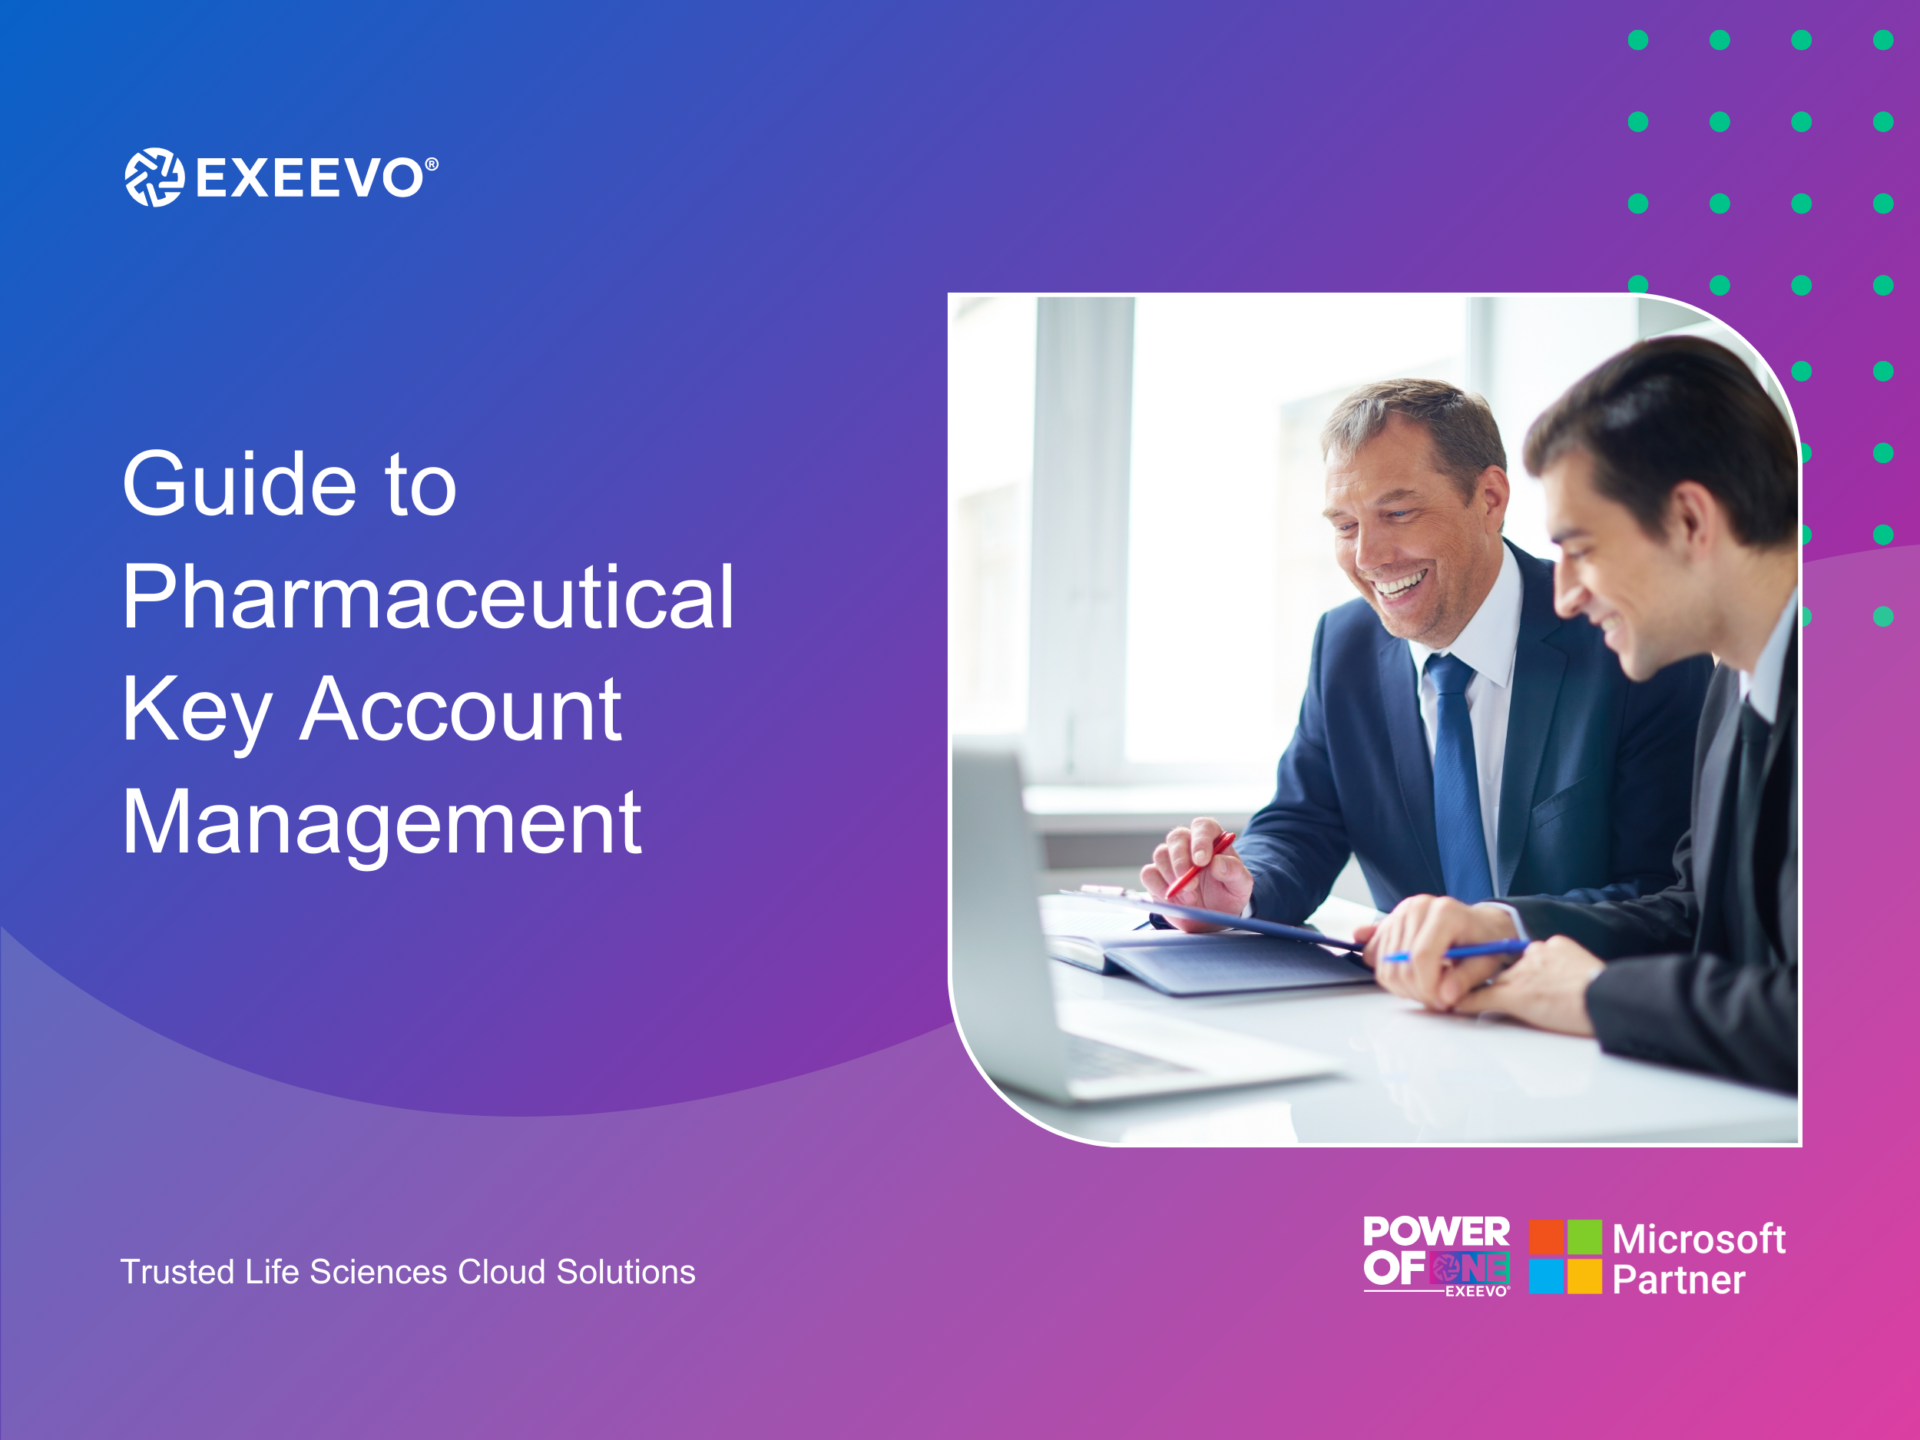 Exeevo's Definitive Guide to Pharmaceutical Key Account Management